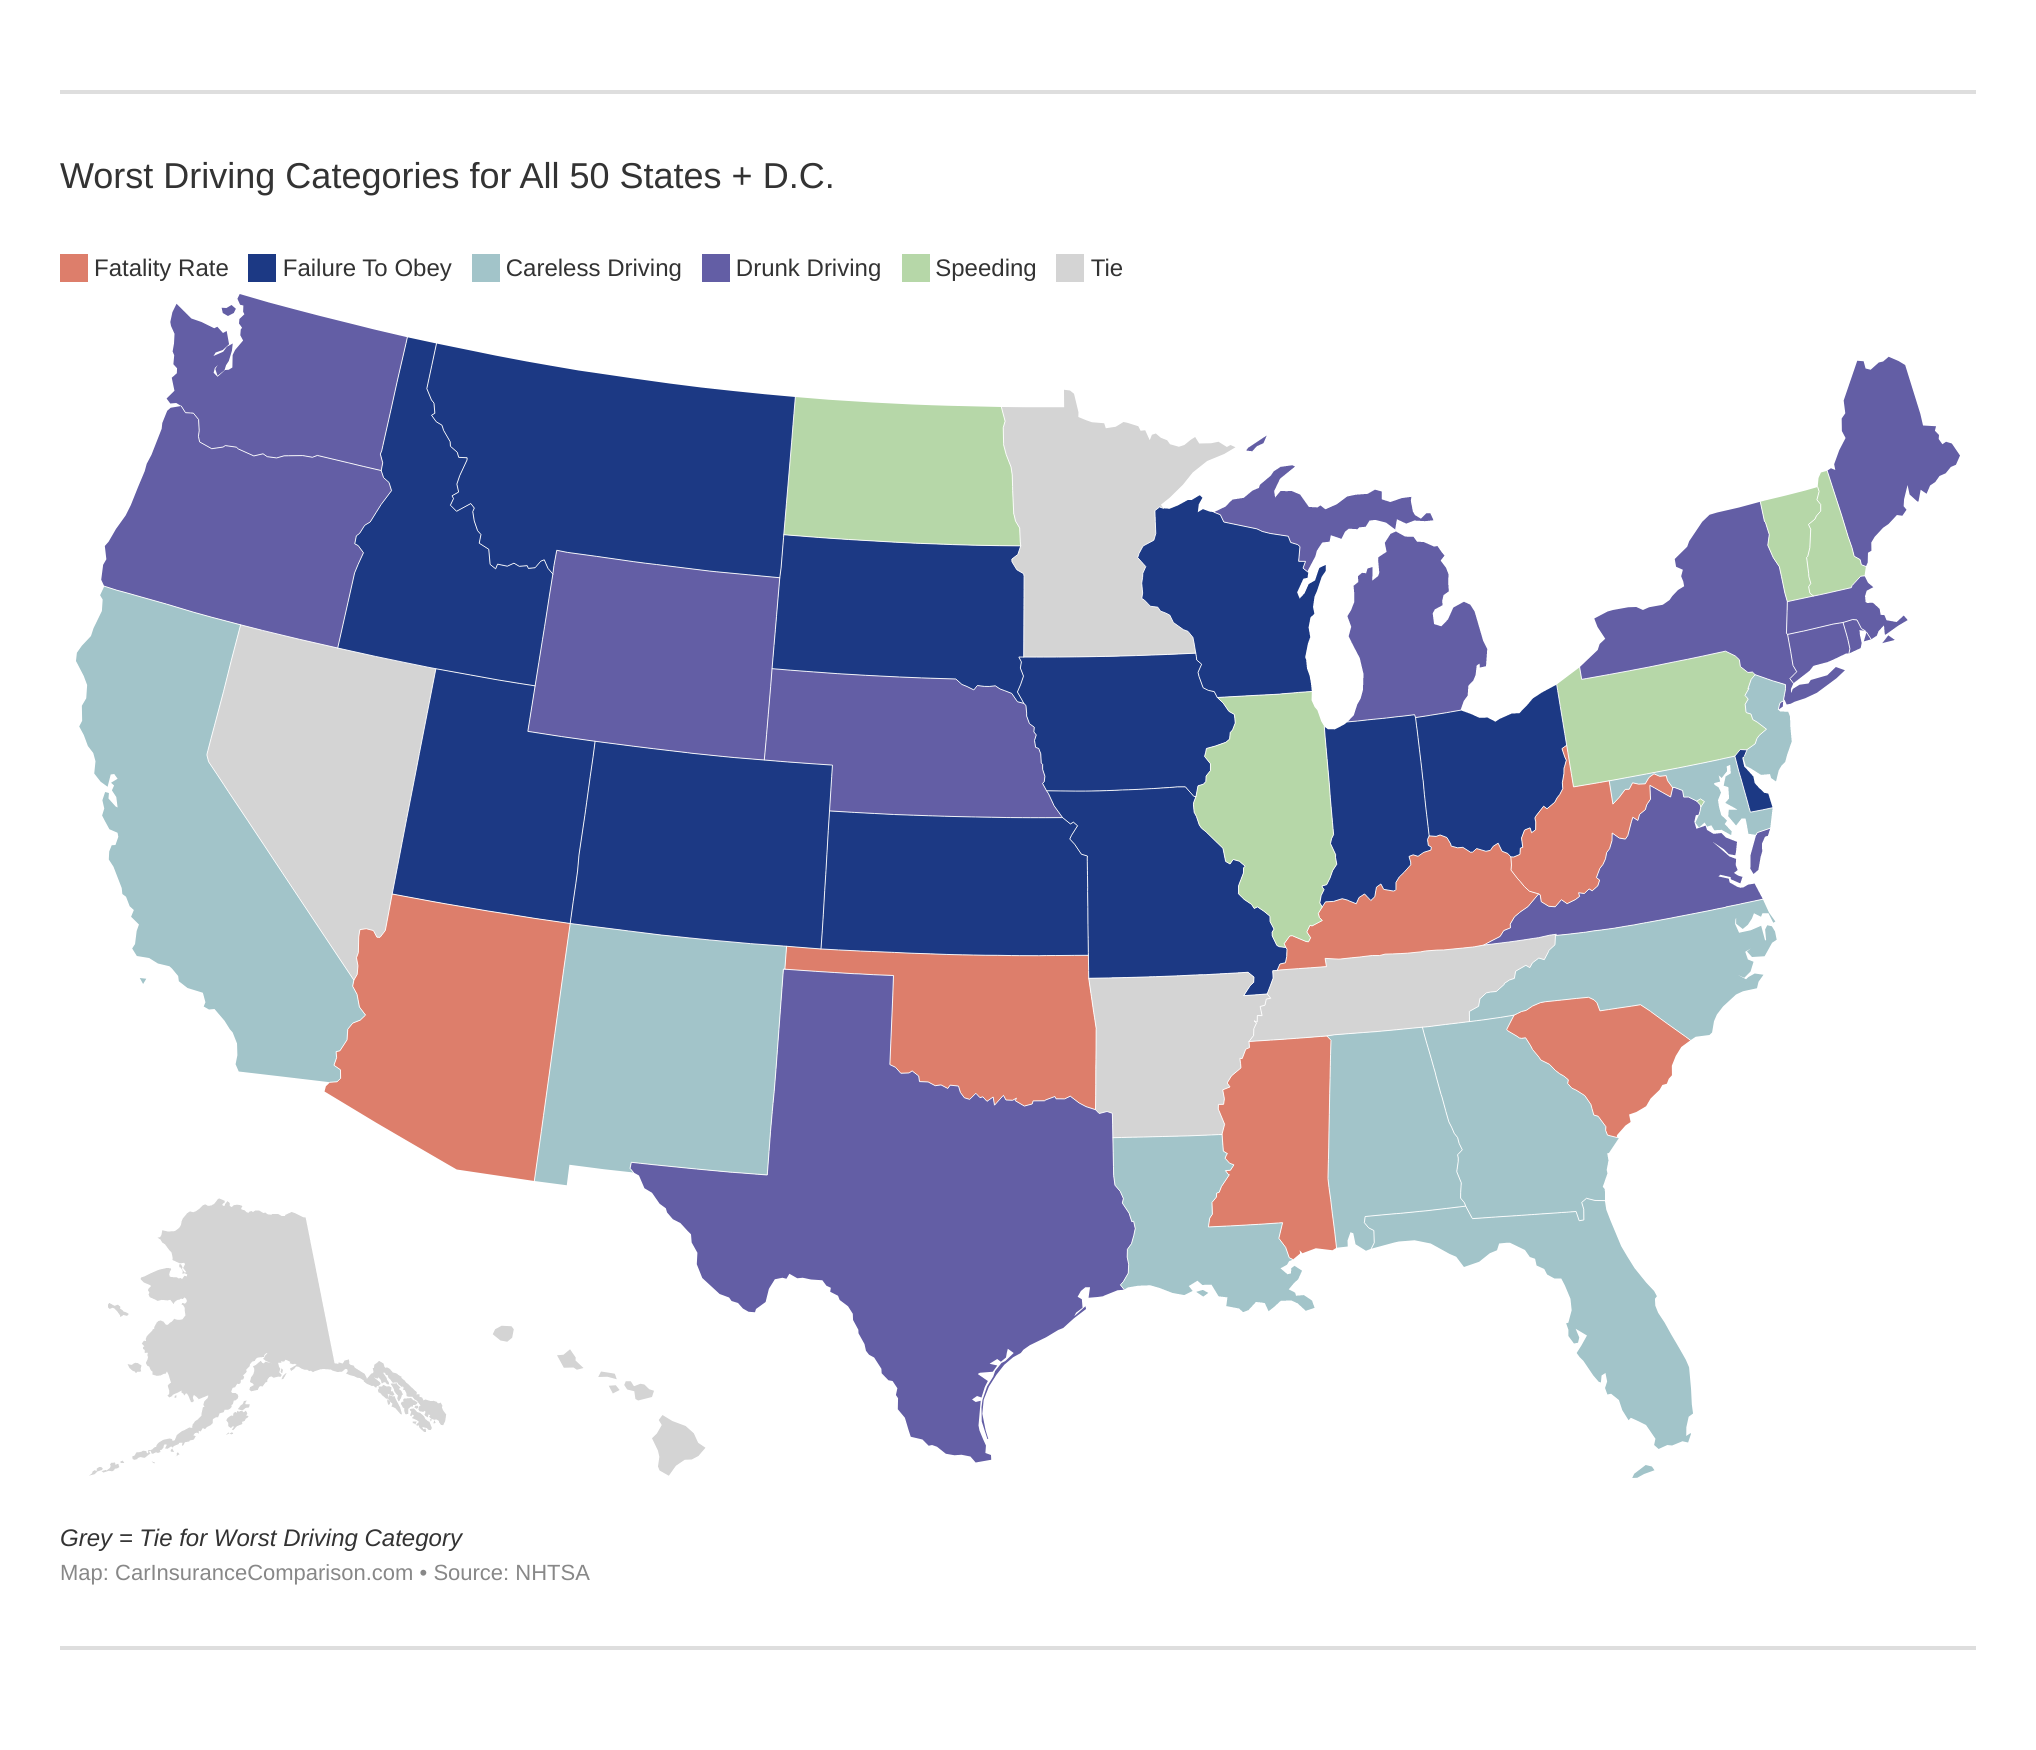 Worst Driving Categories for All 50 States + D.C.